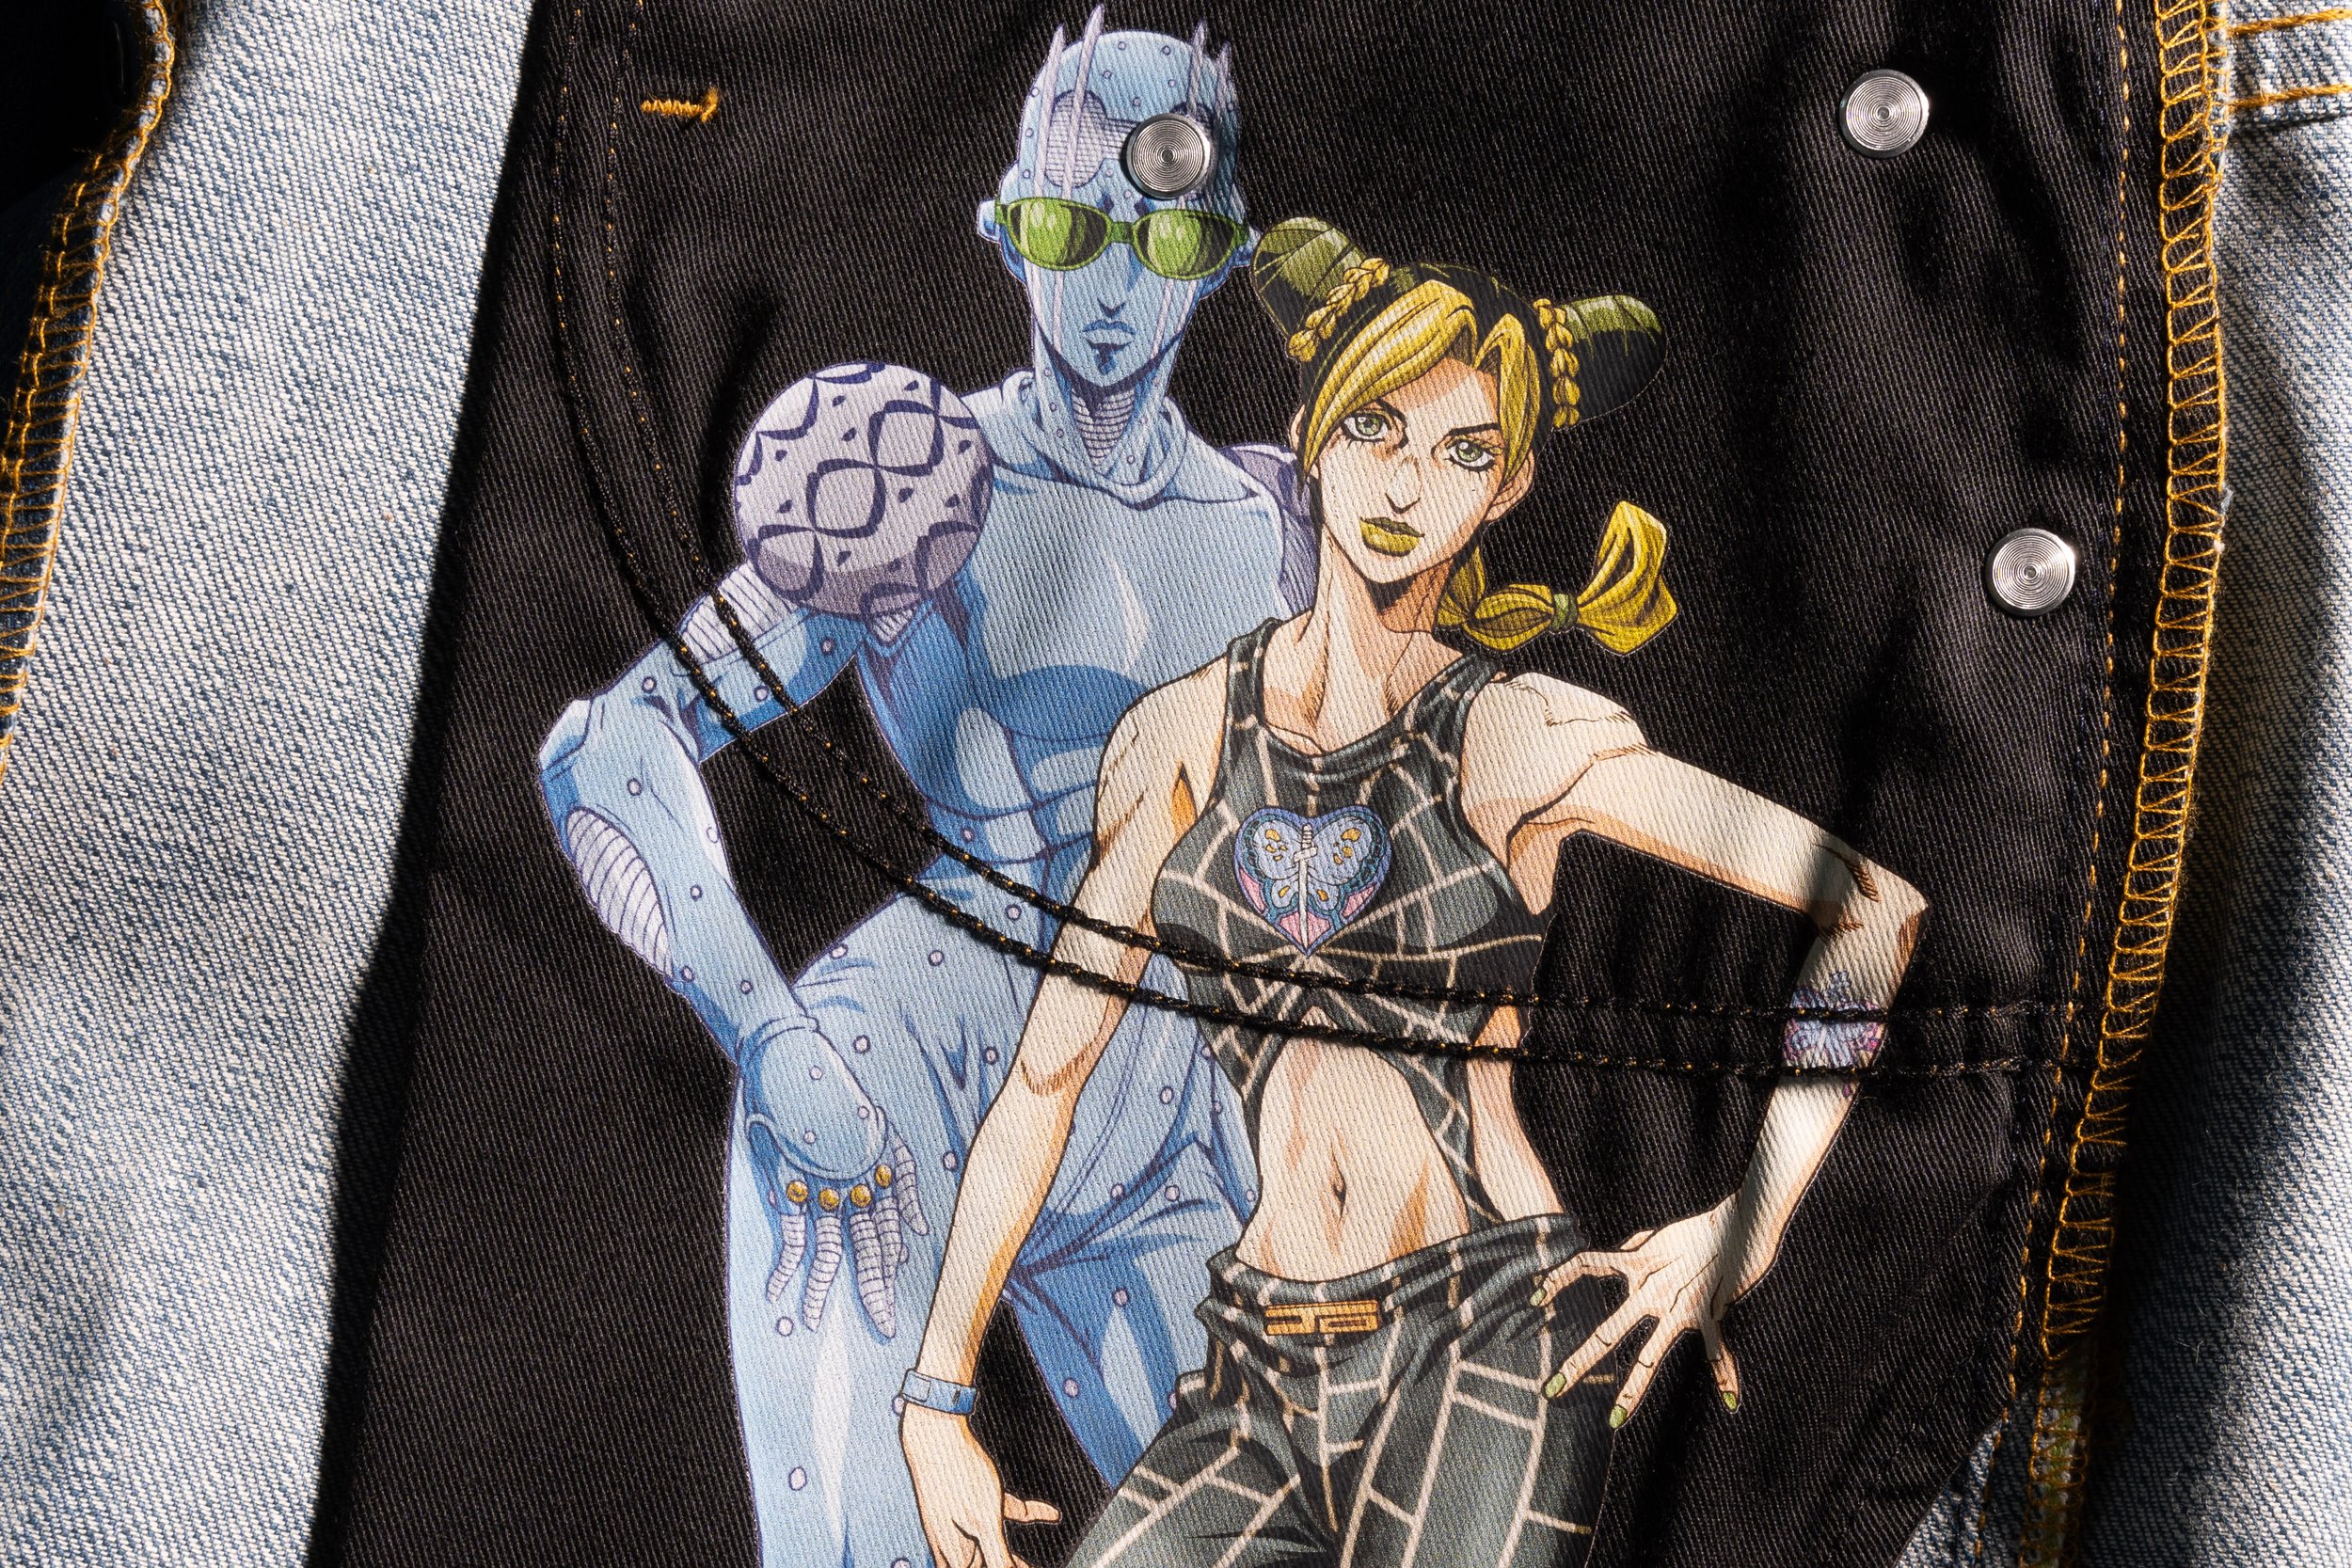 Naked & Famous Denim Collaborates with JoJo's Bizarre Adventure for an  Exclusive Capsule Collection